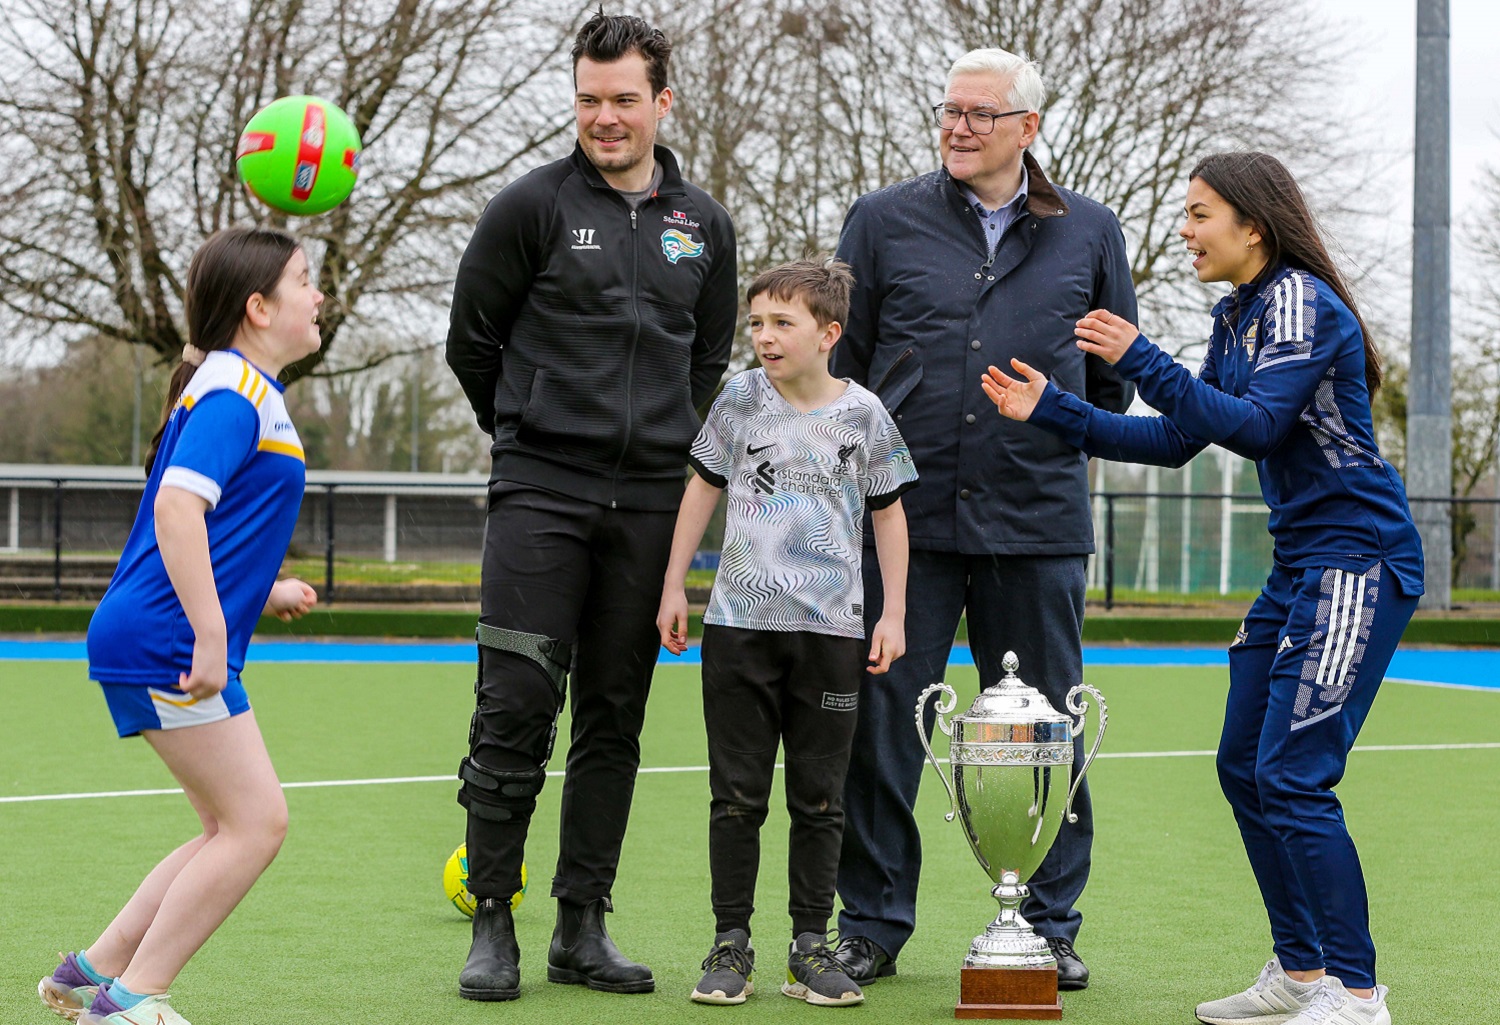 Sports stars inspire 700 primary school children to become more active, more of the time at Department for Communities Celebration of Sport Department for Communities